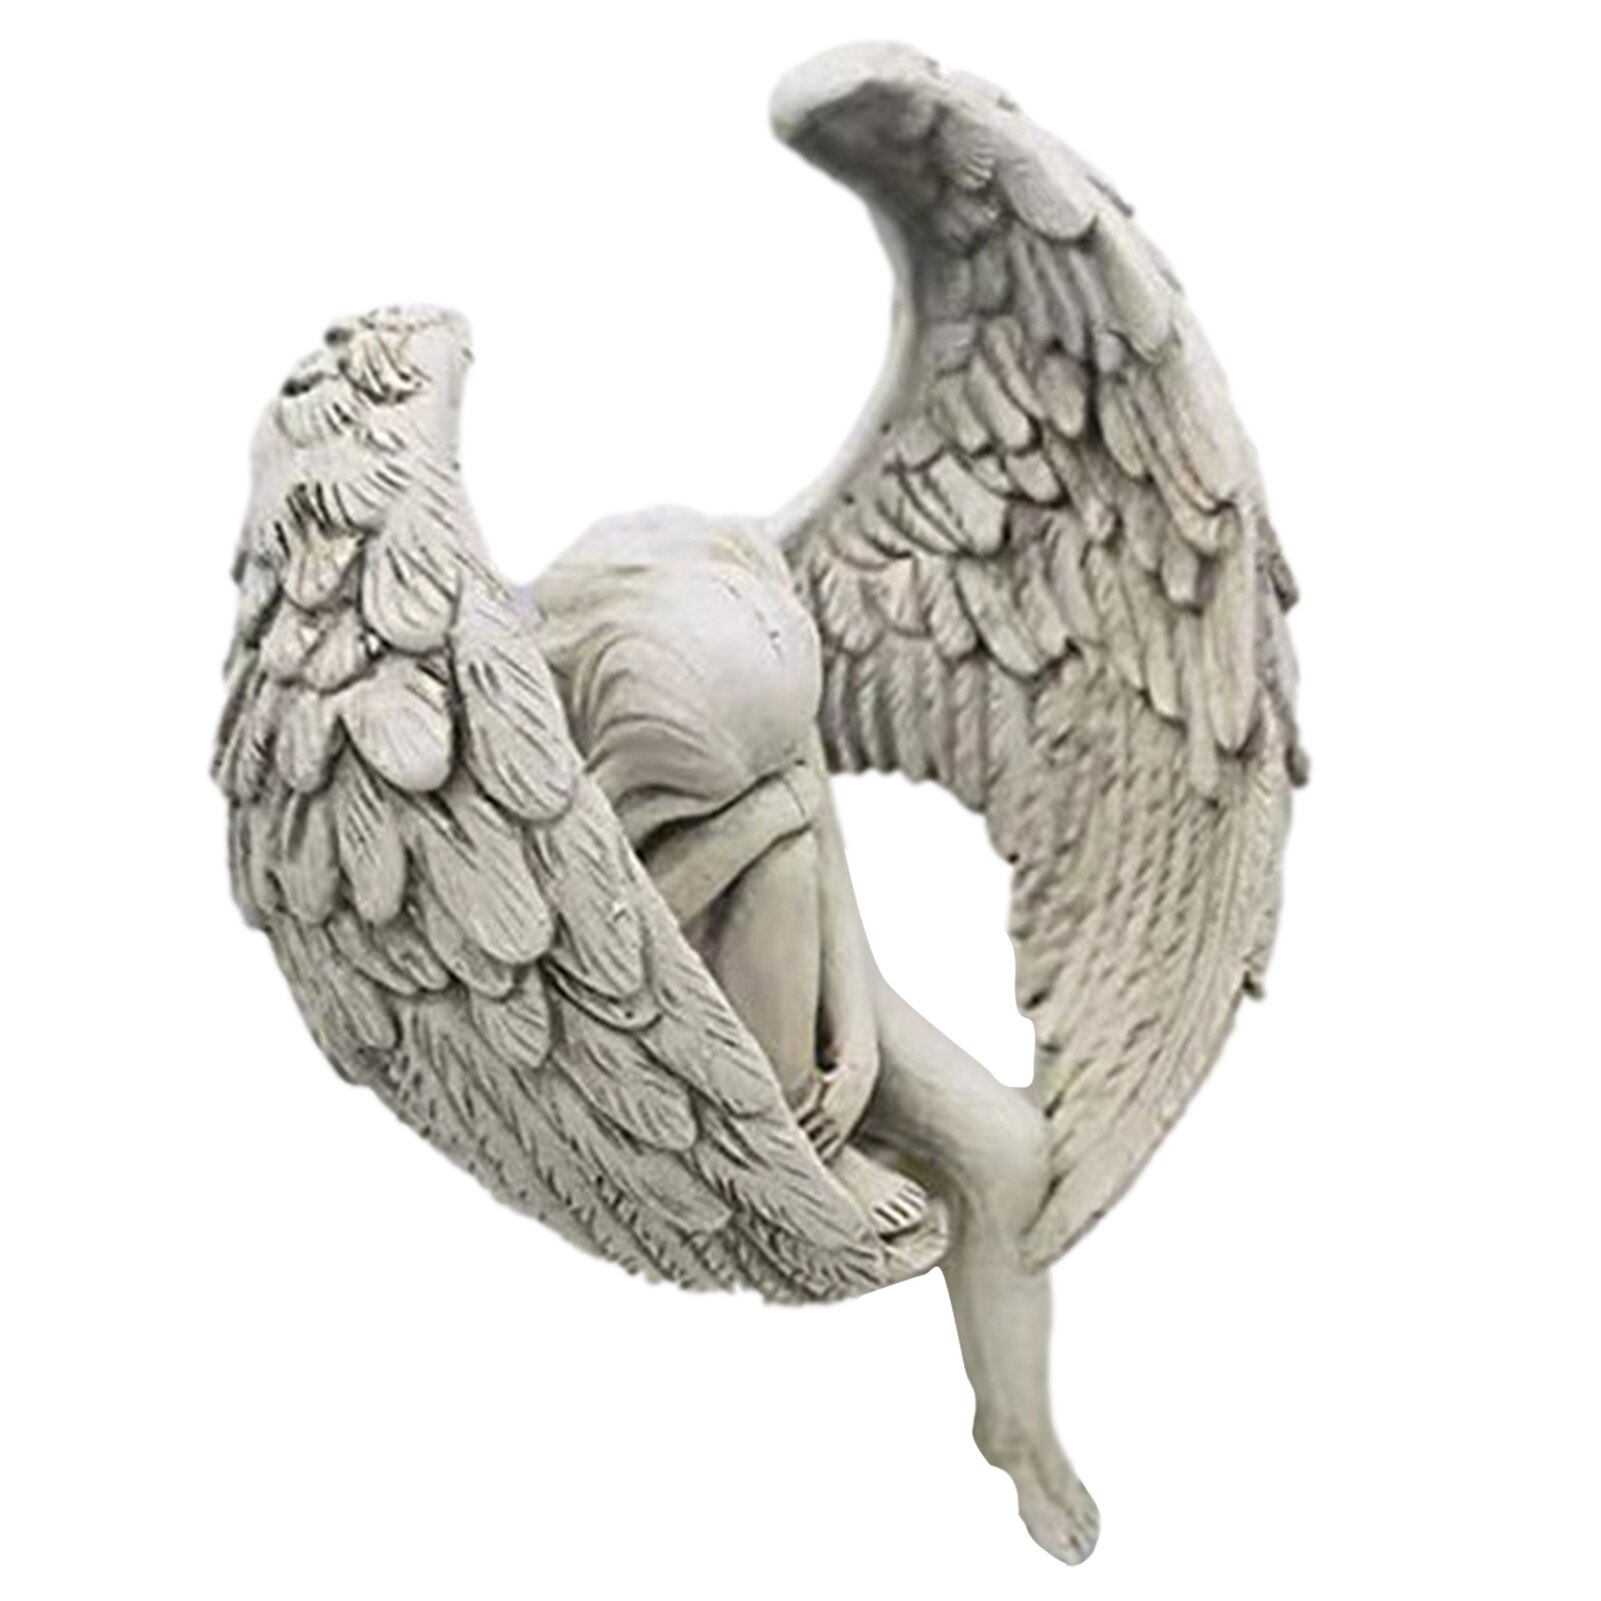 The Anguished Angel Long-Winged Sitting Statue Resin Sorrowful Figure Memorial Cemetery Statues Crying Garden Outdoor Decoration